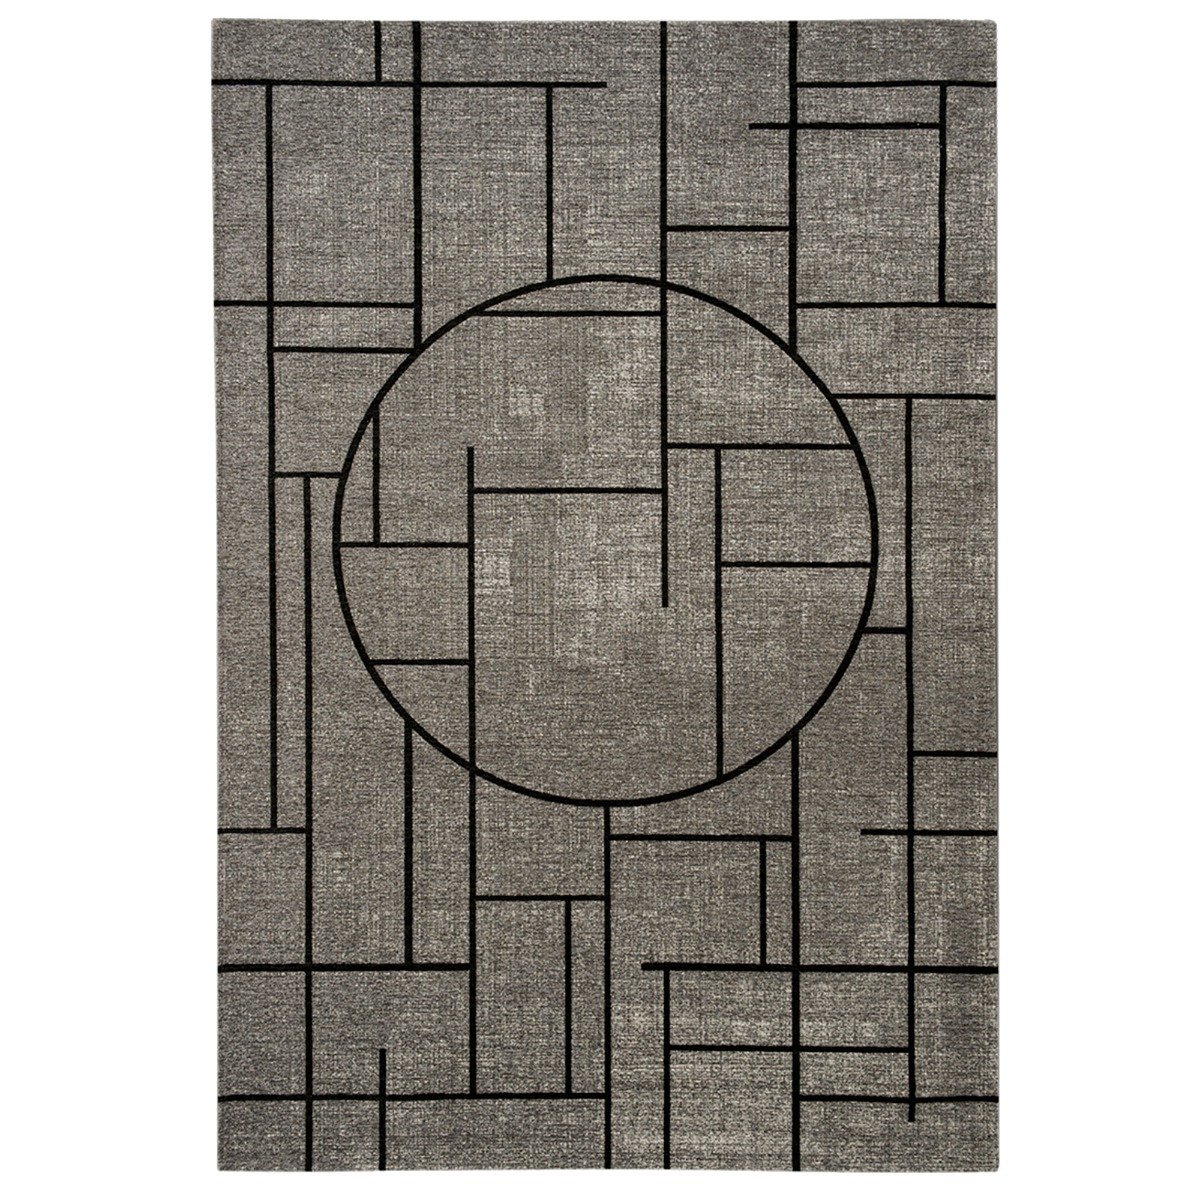 Calligaris Chinese Rug 200x300cm, Square, Grey | Barker & Stonehouse